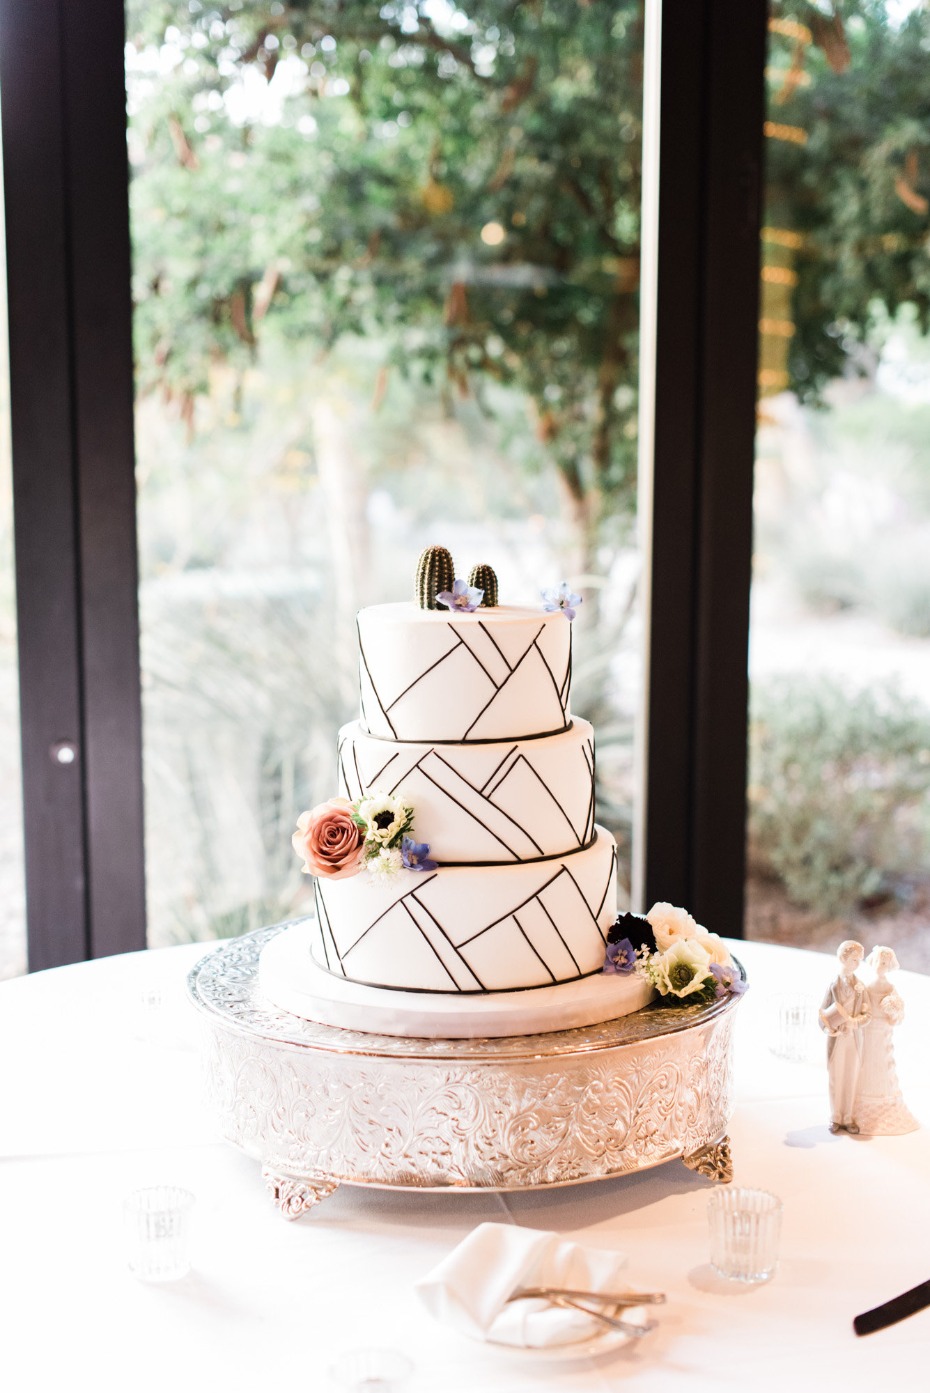 Modern wedding cake with cactus toppers